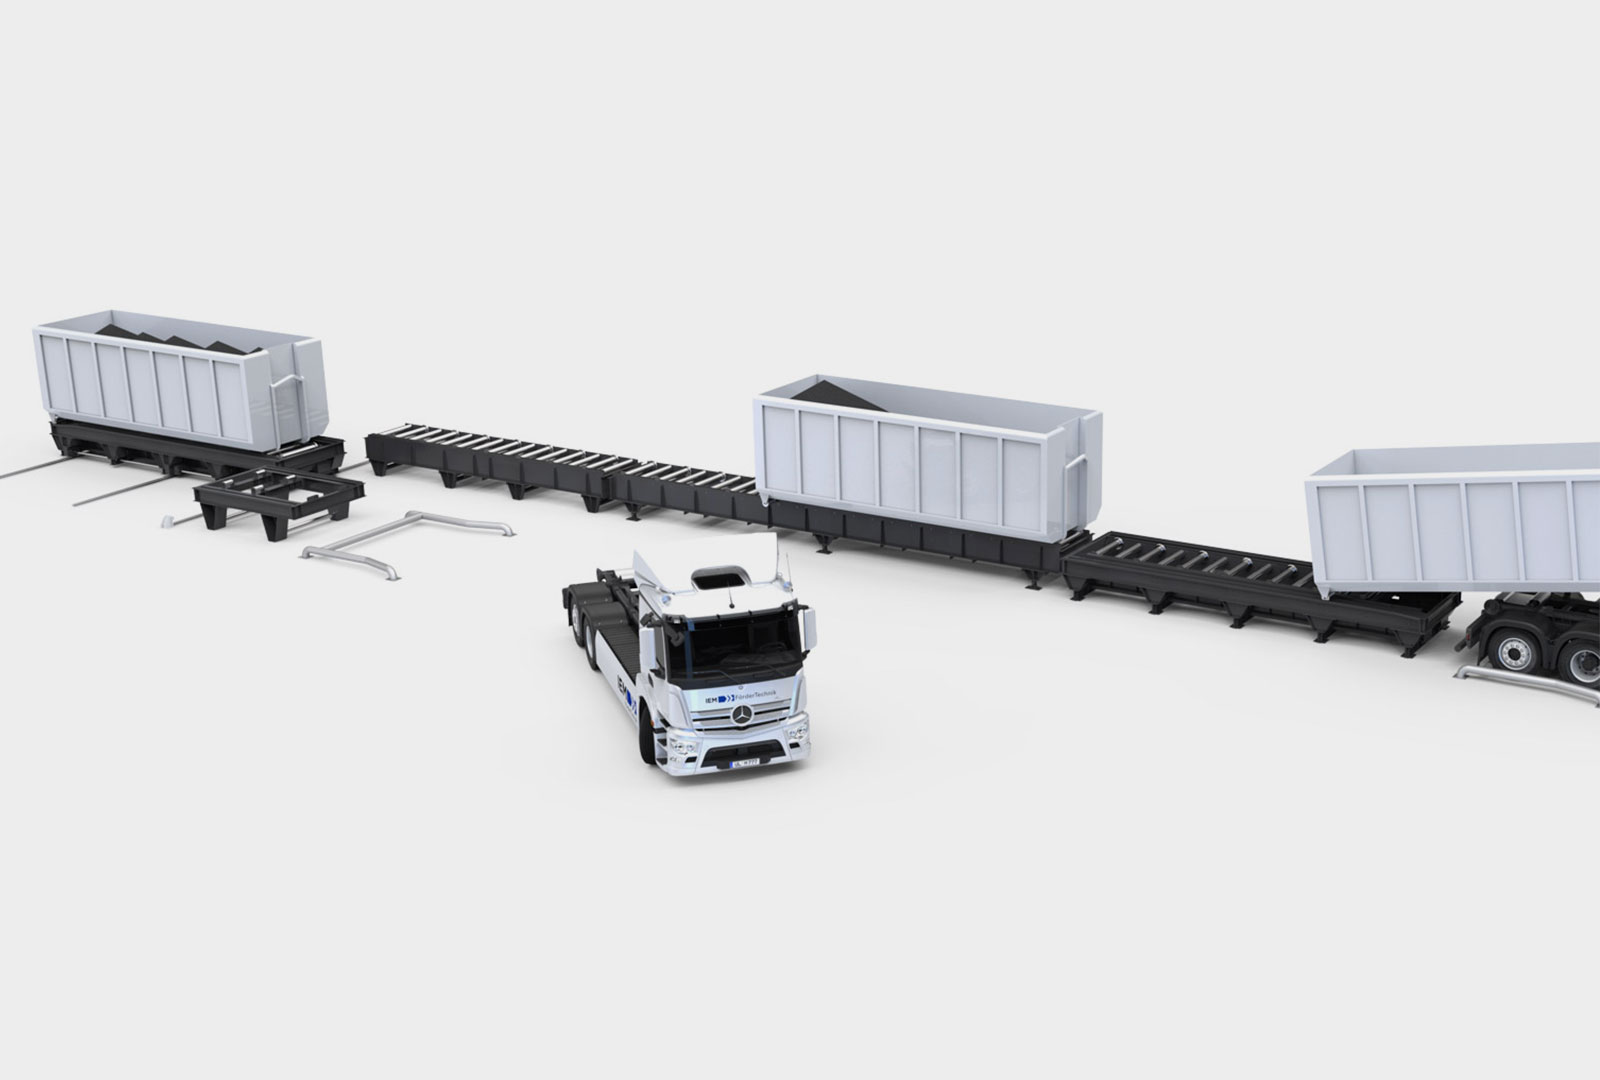 IEM - Container Transfer Systems